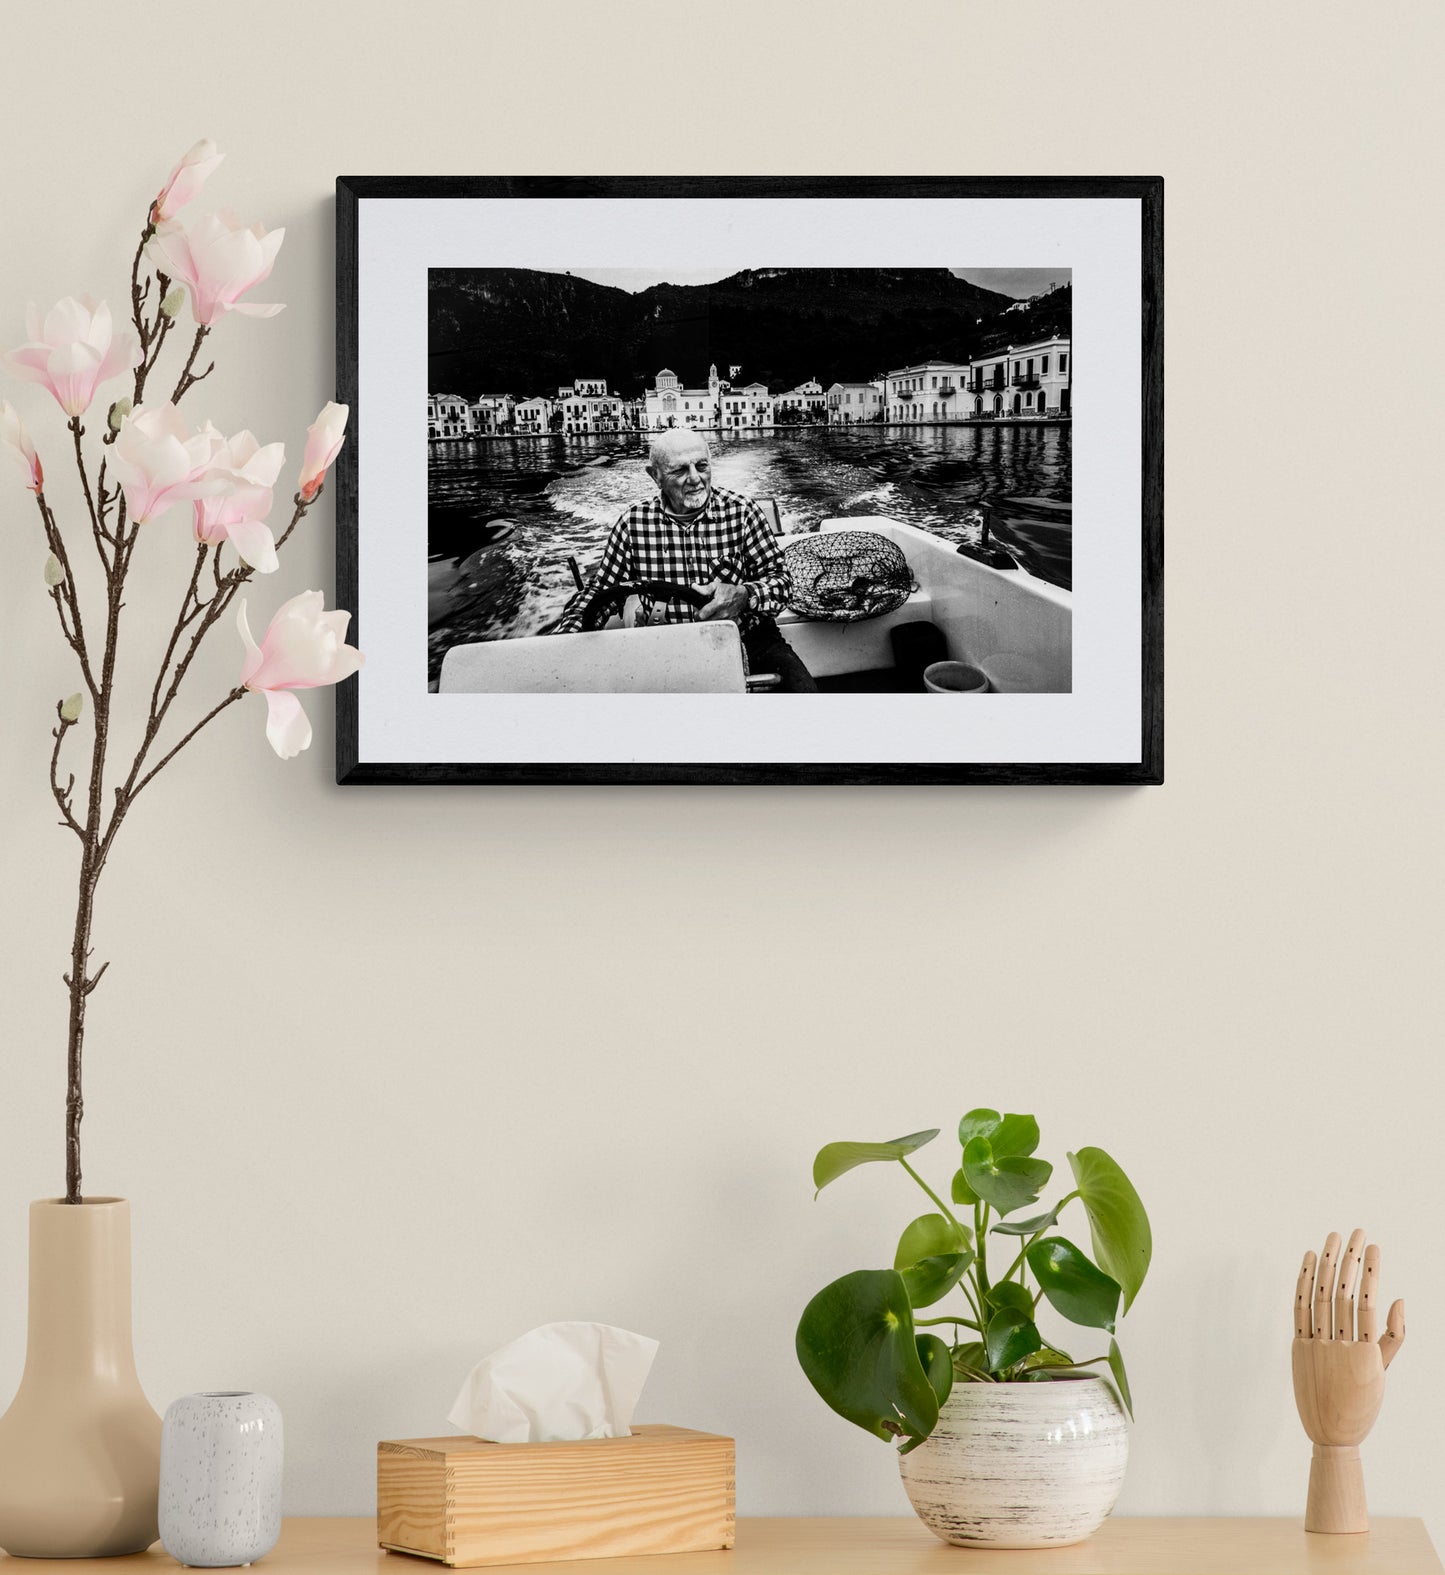 Black and White Photography Wall Art Greece | Boat in Kastellorizon Dodecanese by George Tatakis - single framed photo